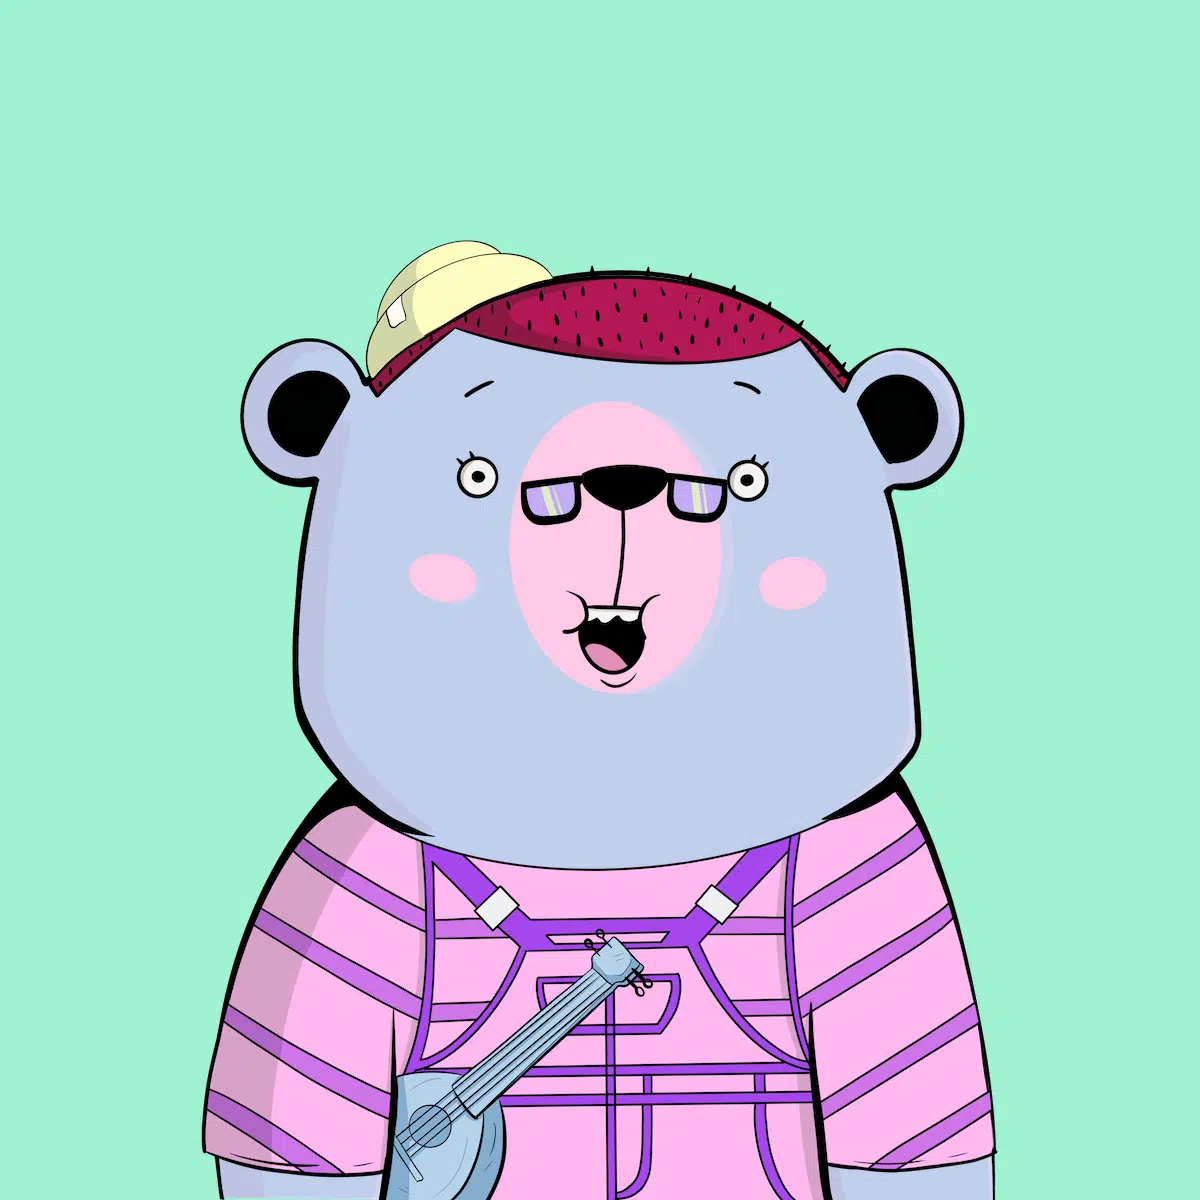 Alex Packer (his bear alter ego :) ), founder of Funny Bears